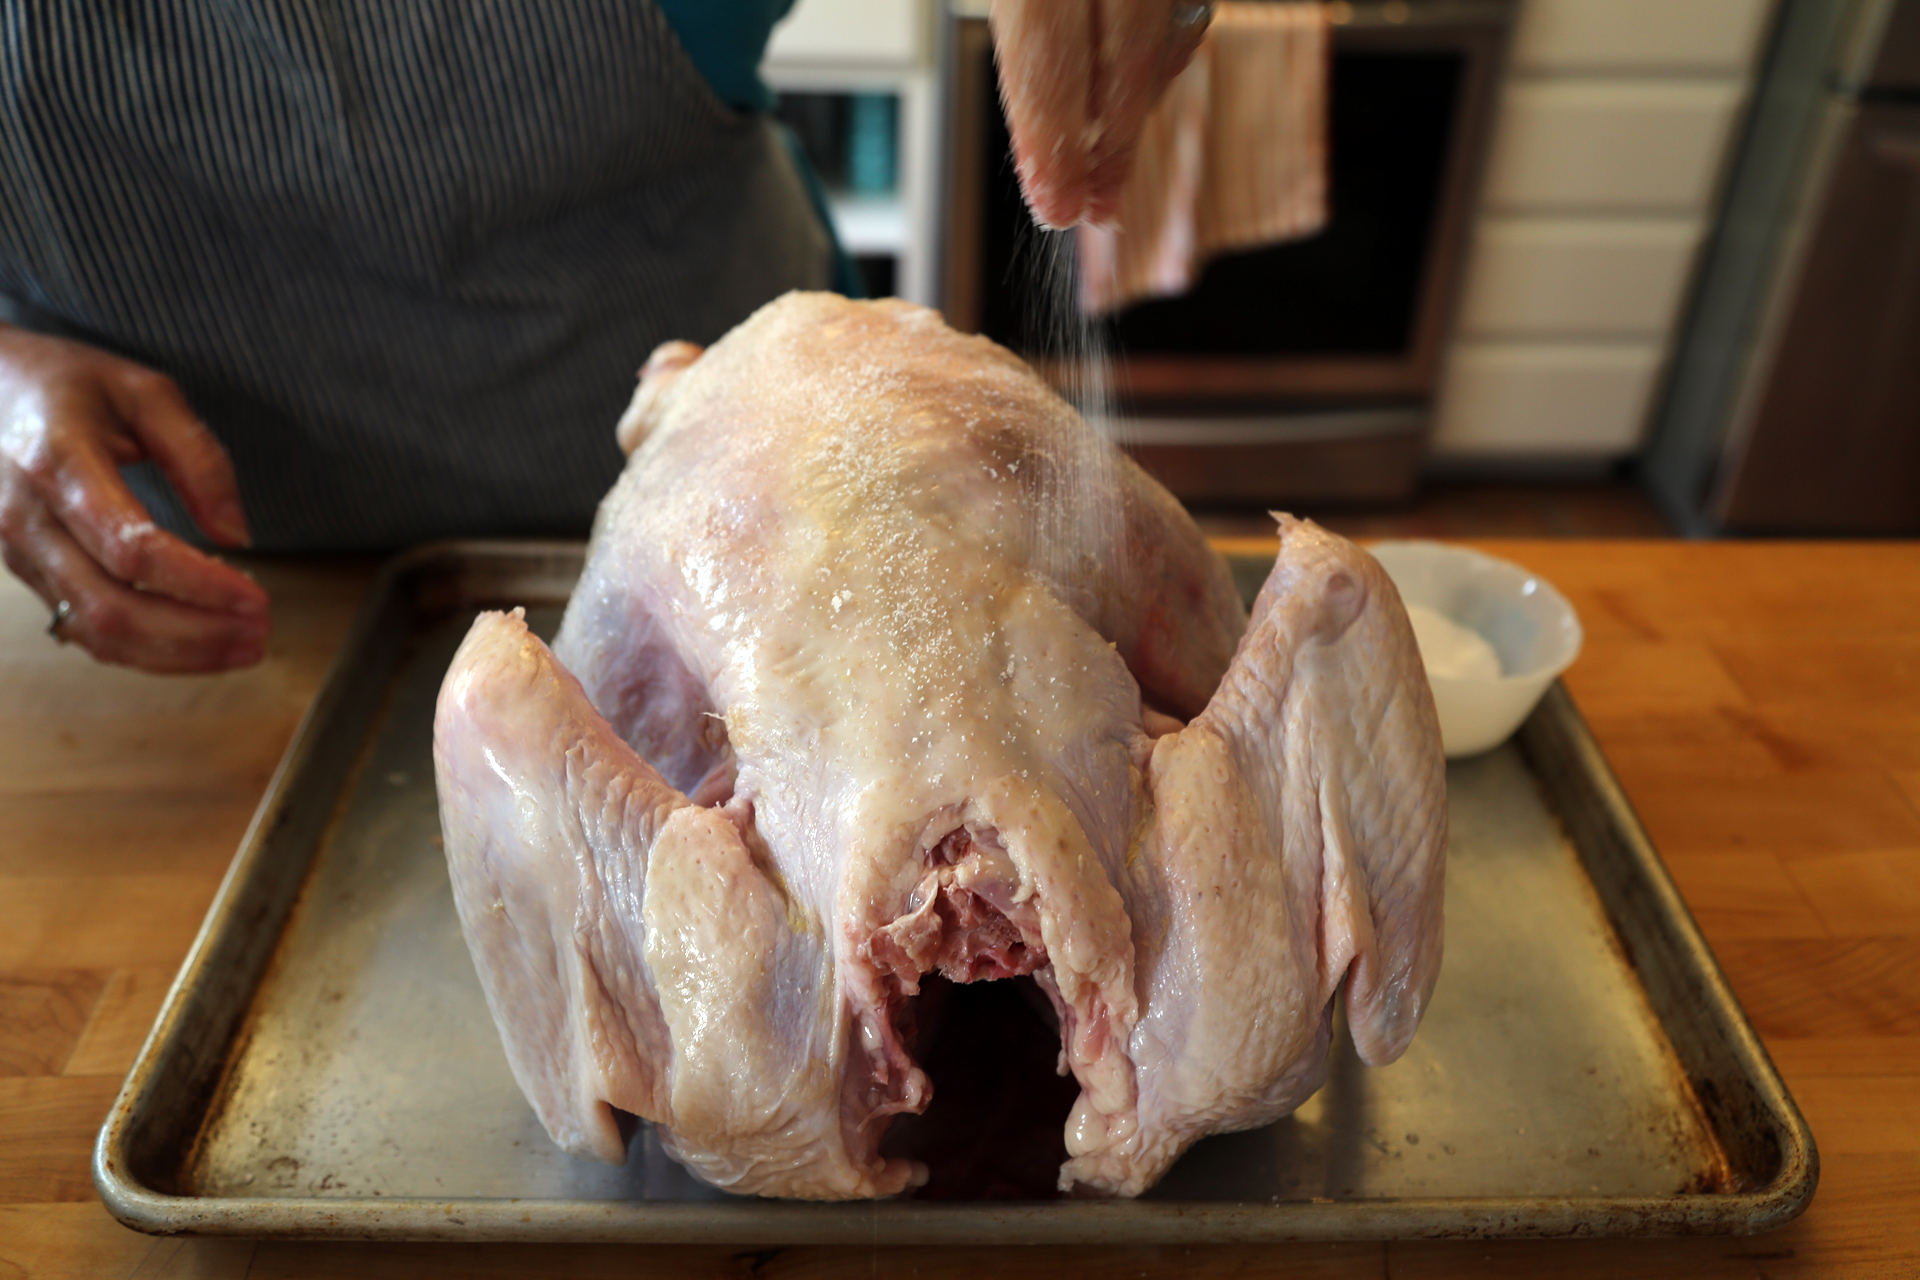 Rub the turkey all over, inside and out, under the skin and over the skin, with plenty of kosher salt and then let it sit and let the salt work its magic.